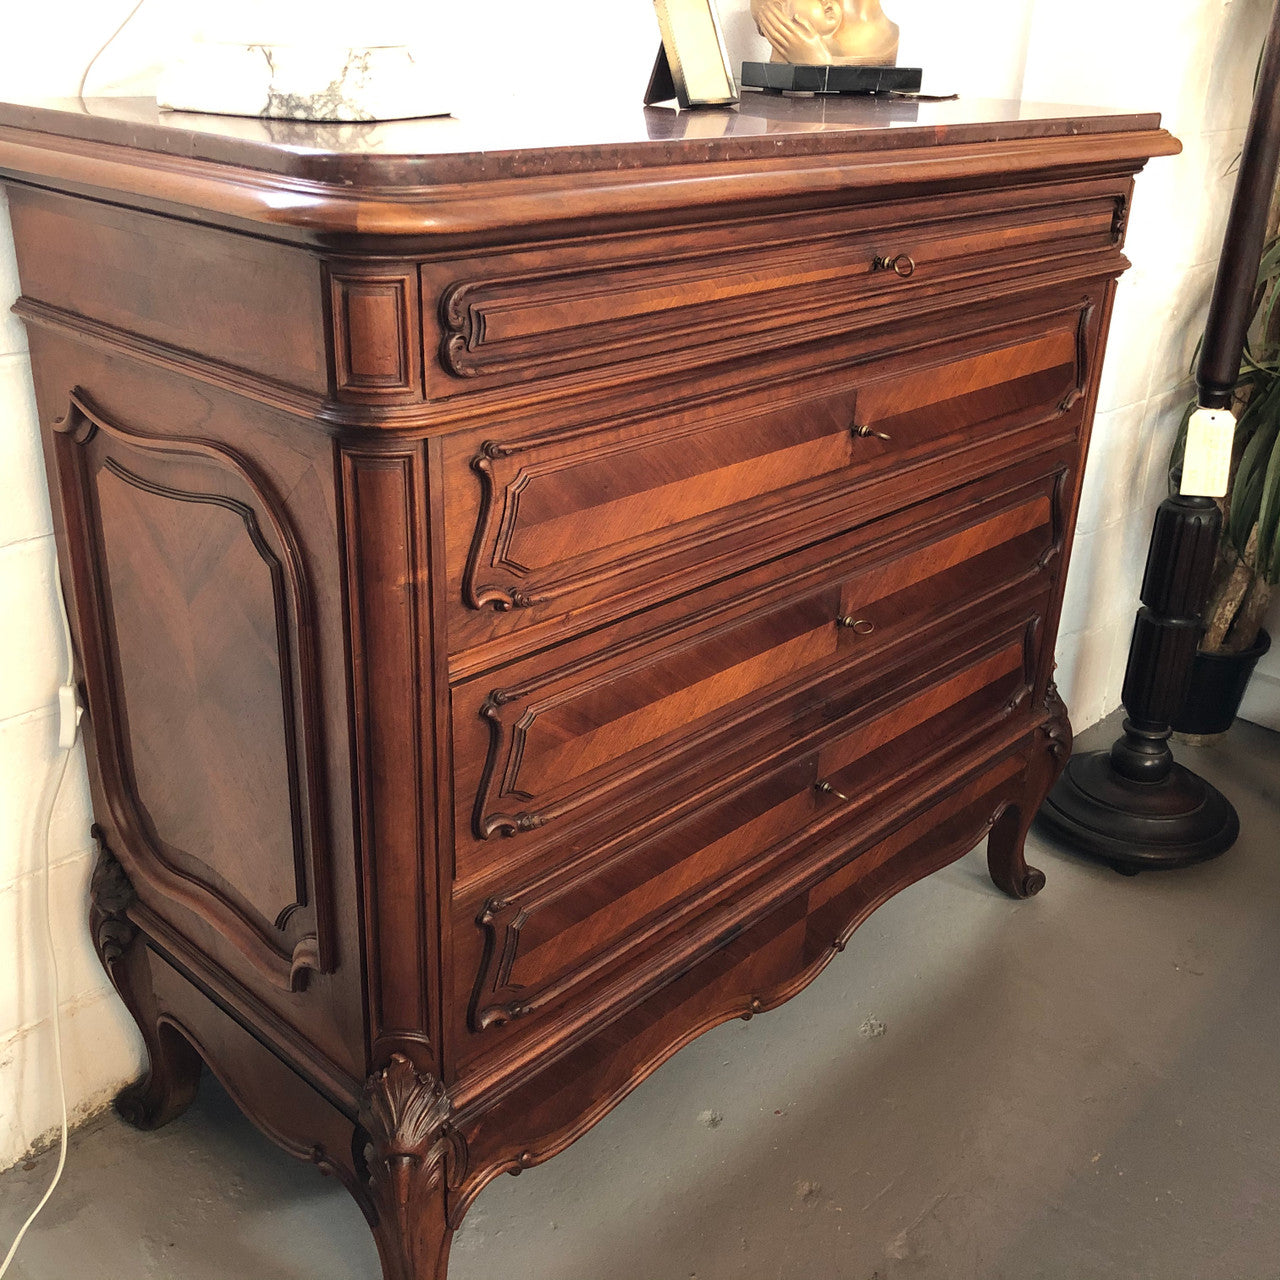 19th Century French Walnut five-drawer marble top commode. In good original detailed condition.